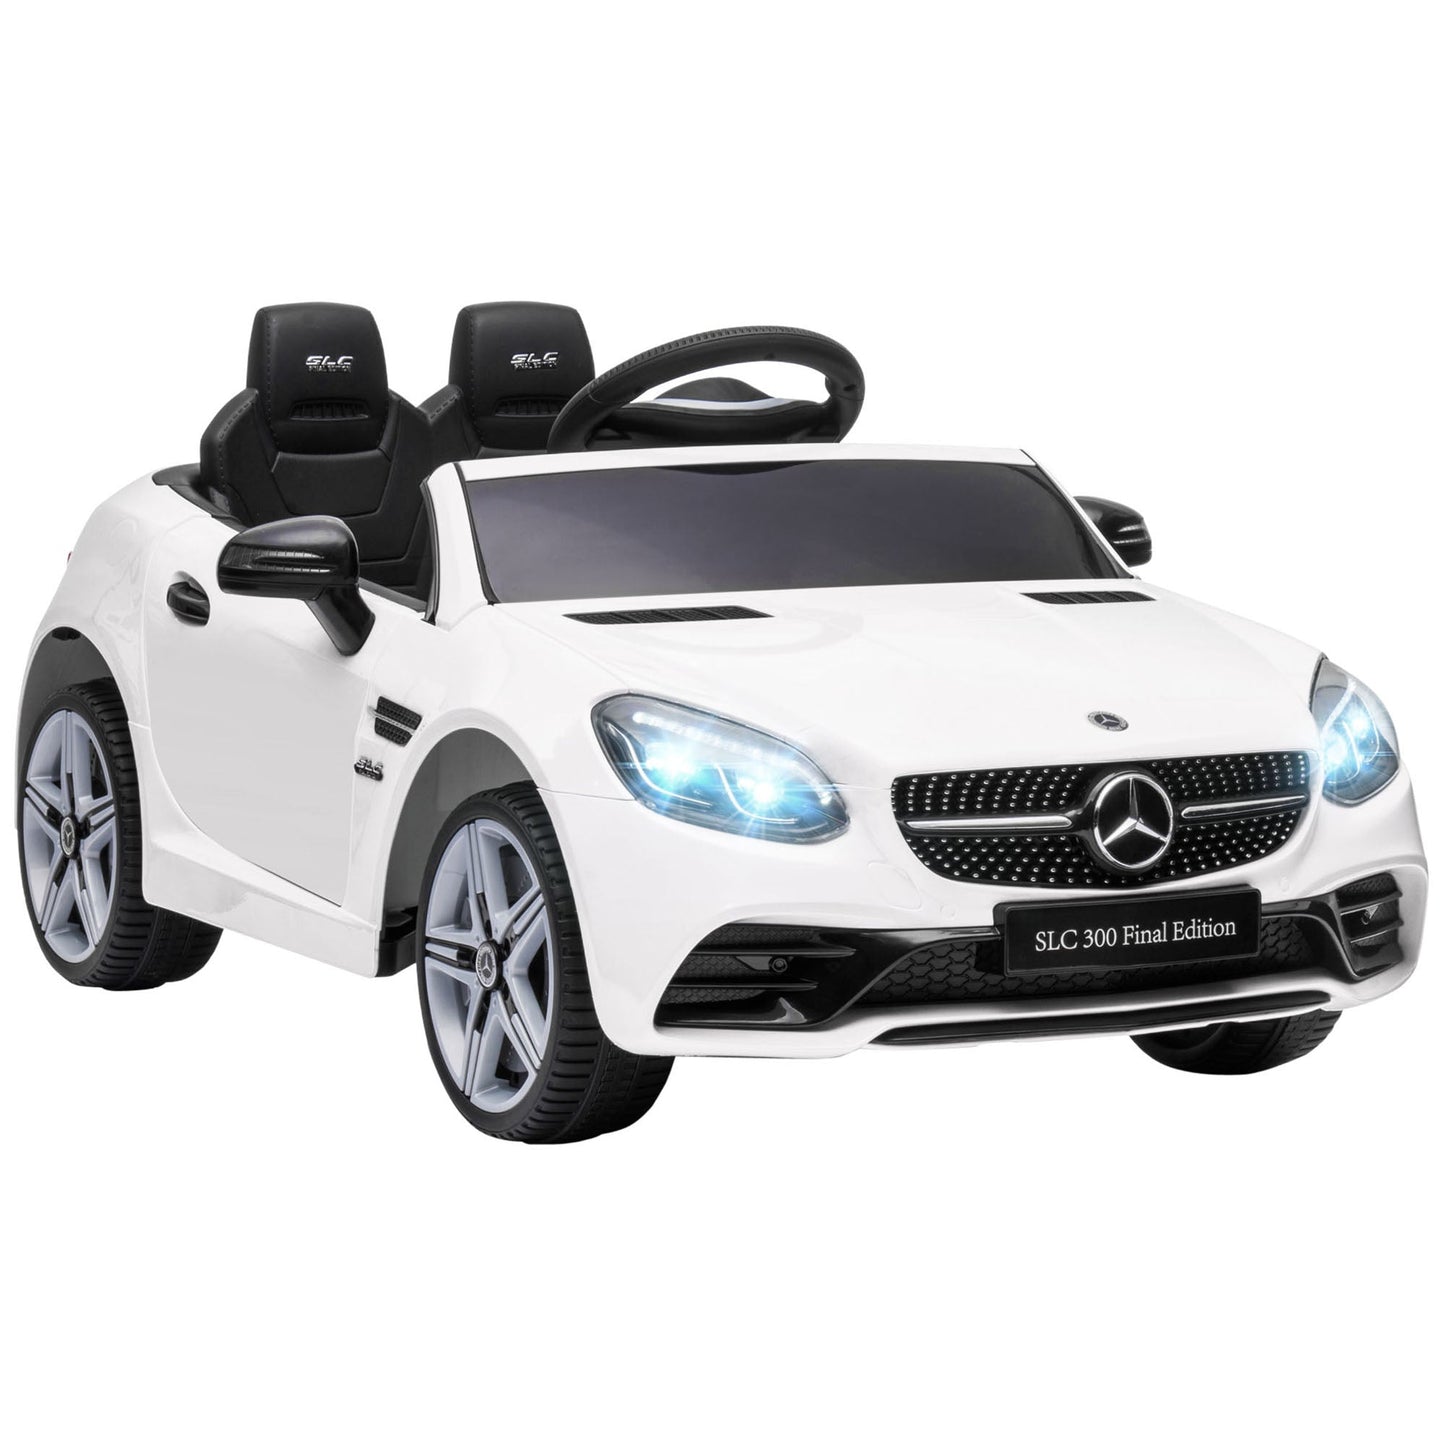 Toys and Games-12V Kids Electric Ride On Car with Remote Control, Battery Powered Toy Car with Music, Lights & Suspension Wheels for 3-7 Years Old, White - Outdoor Style Company